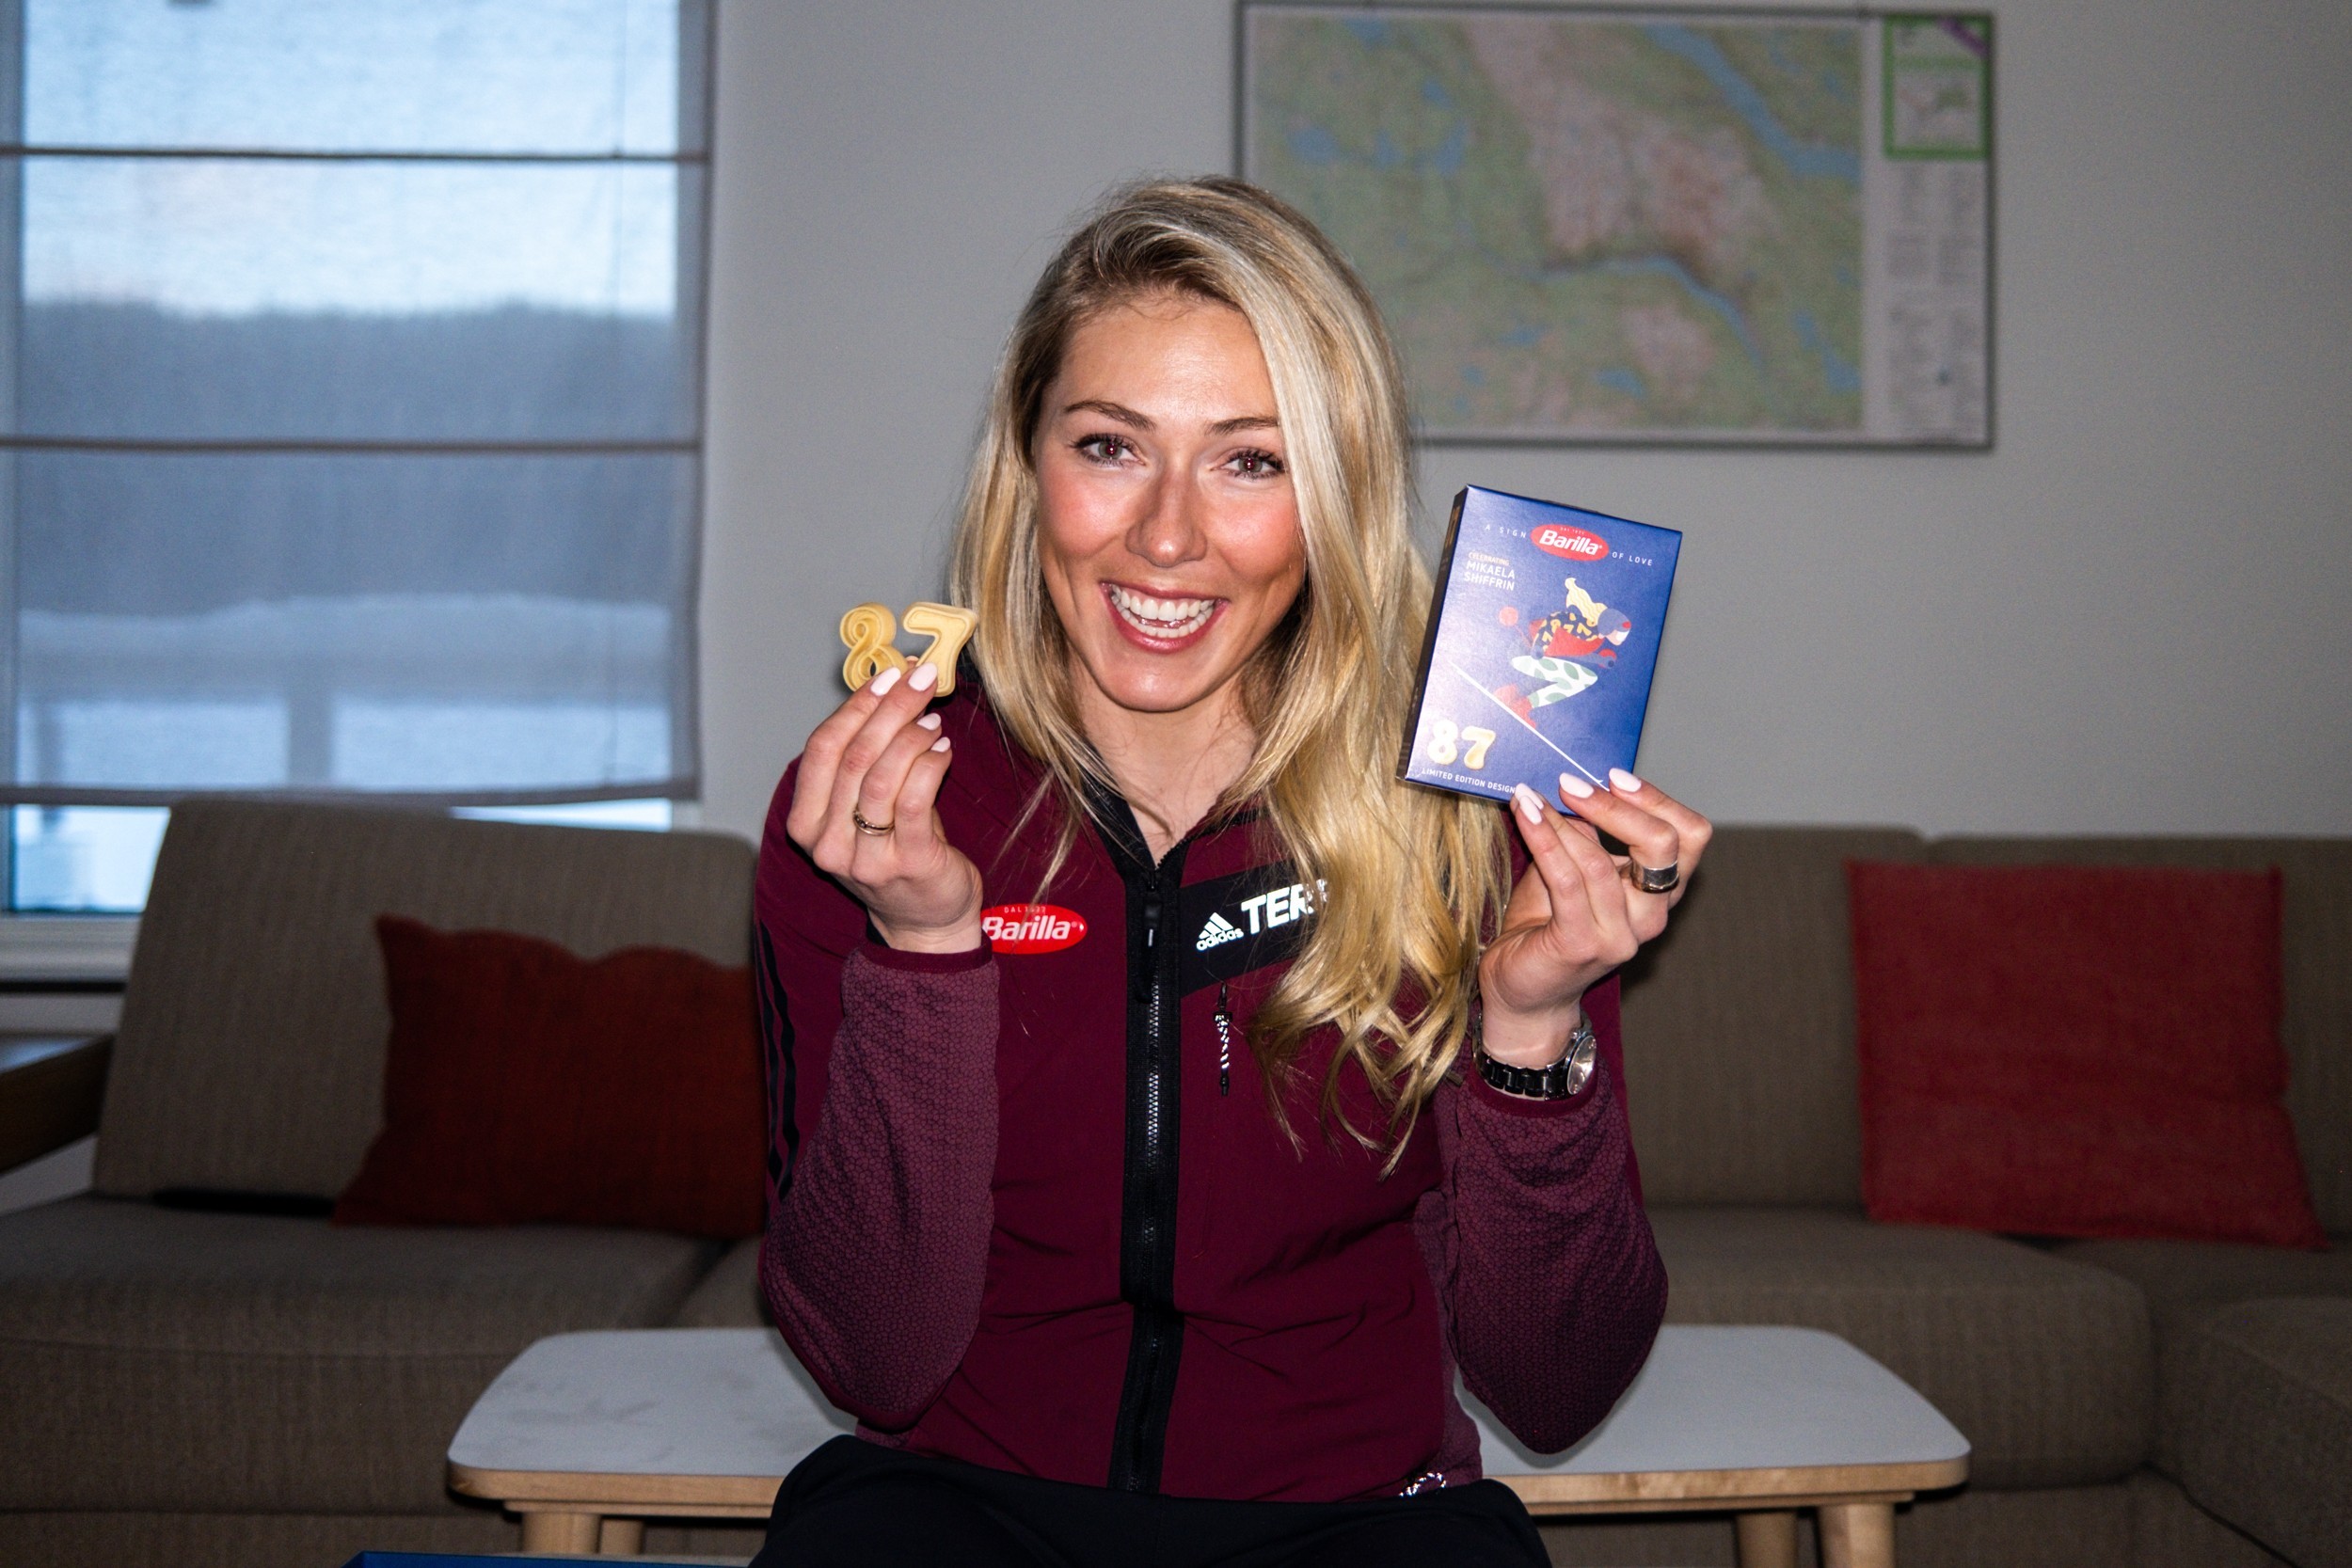 Barilla & Mikaela Shiffrin: Greatness starts with a great recipe - Pack No. 37